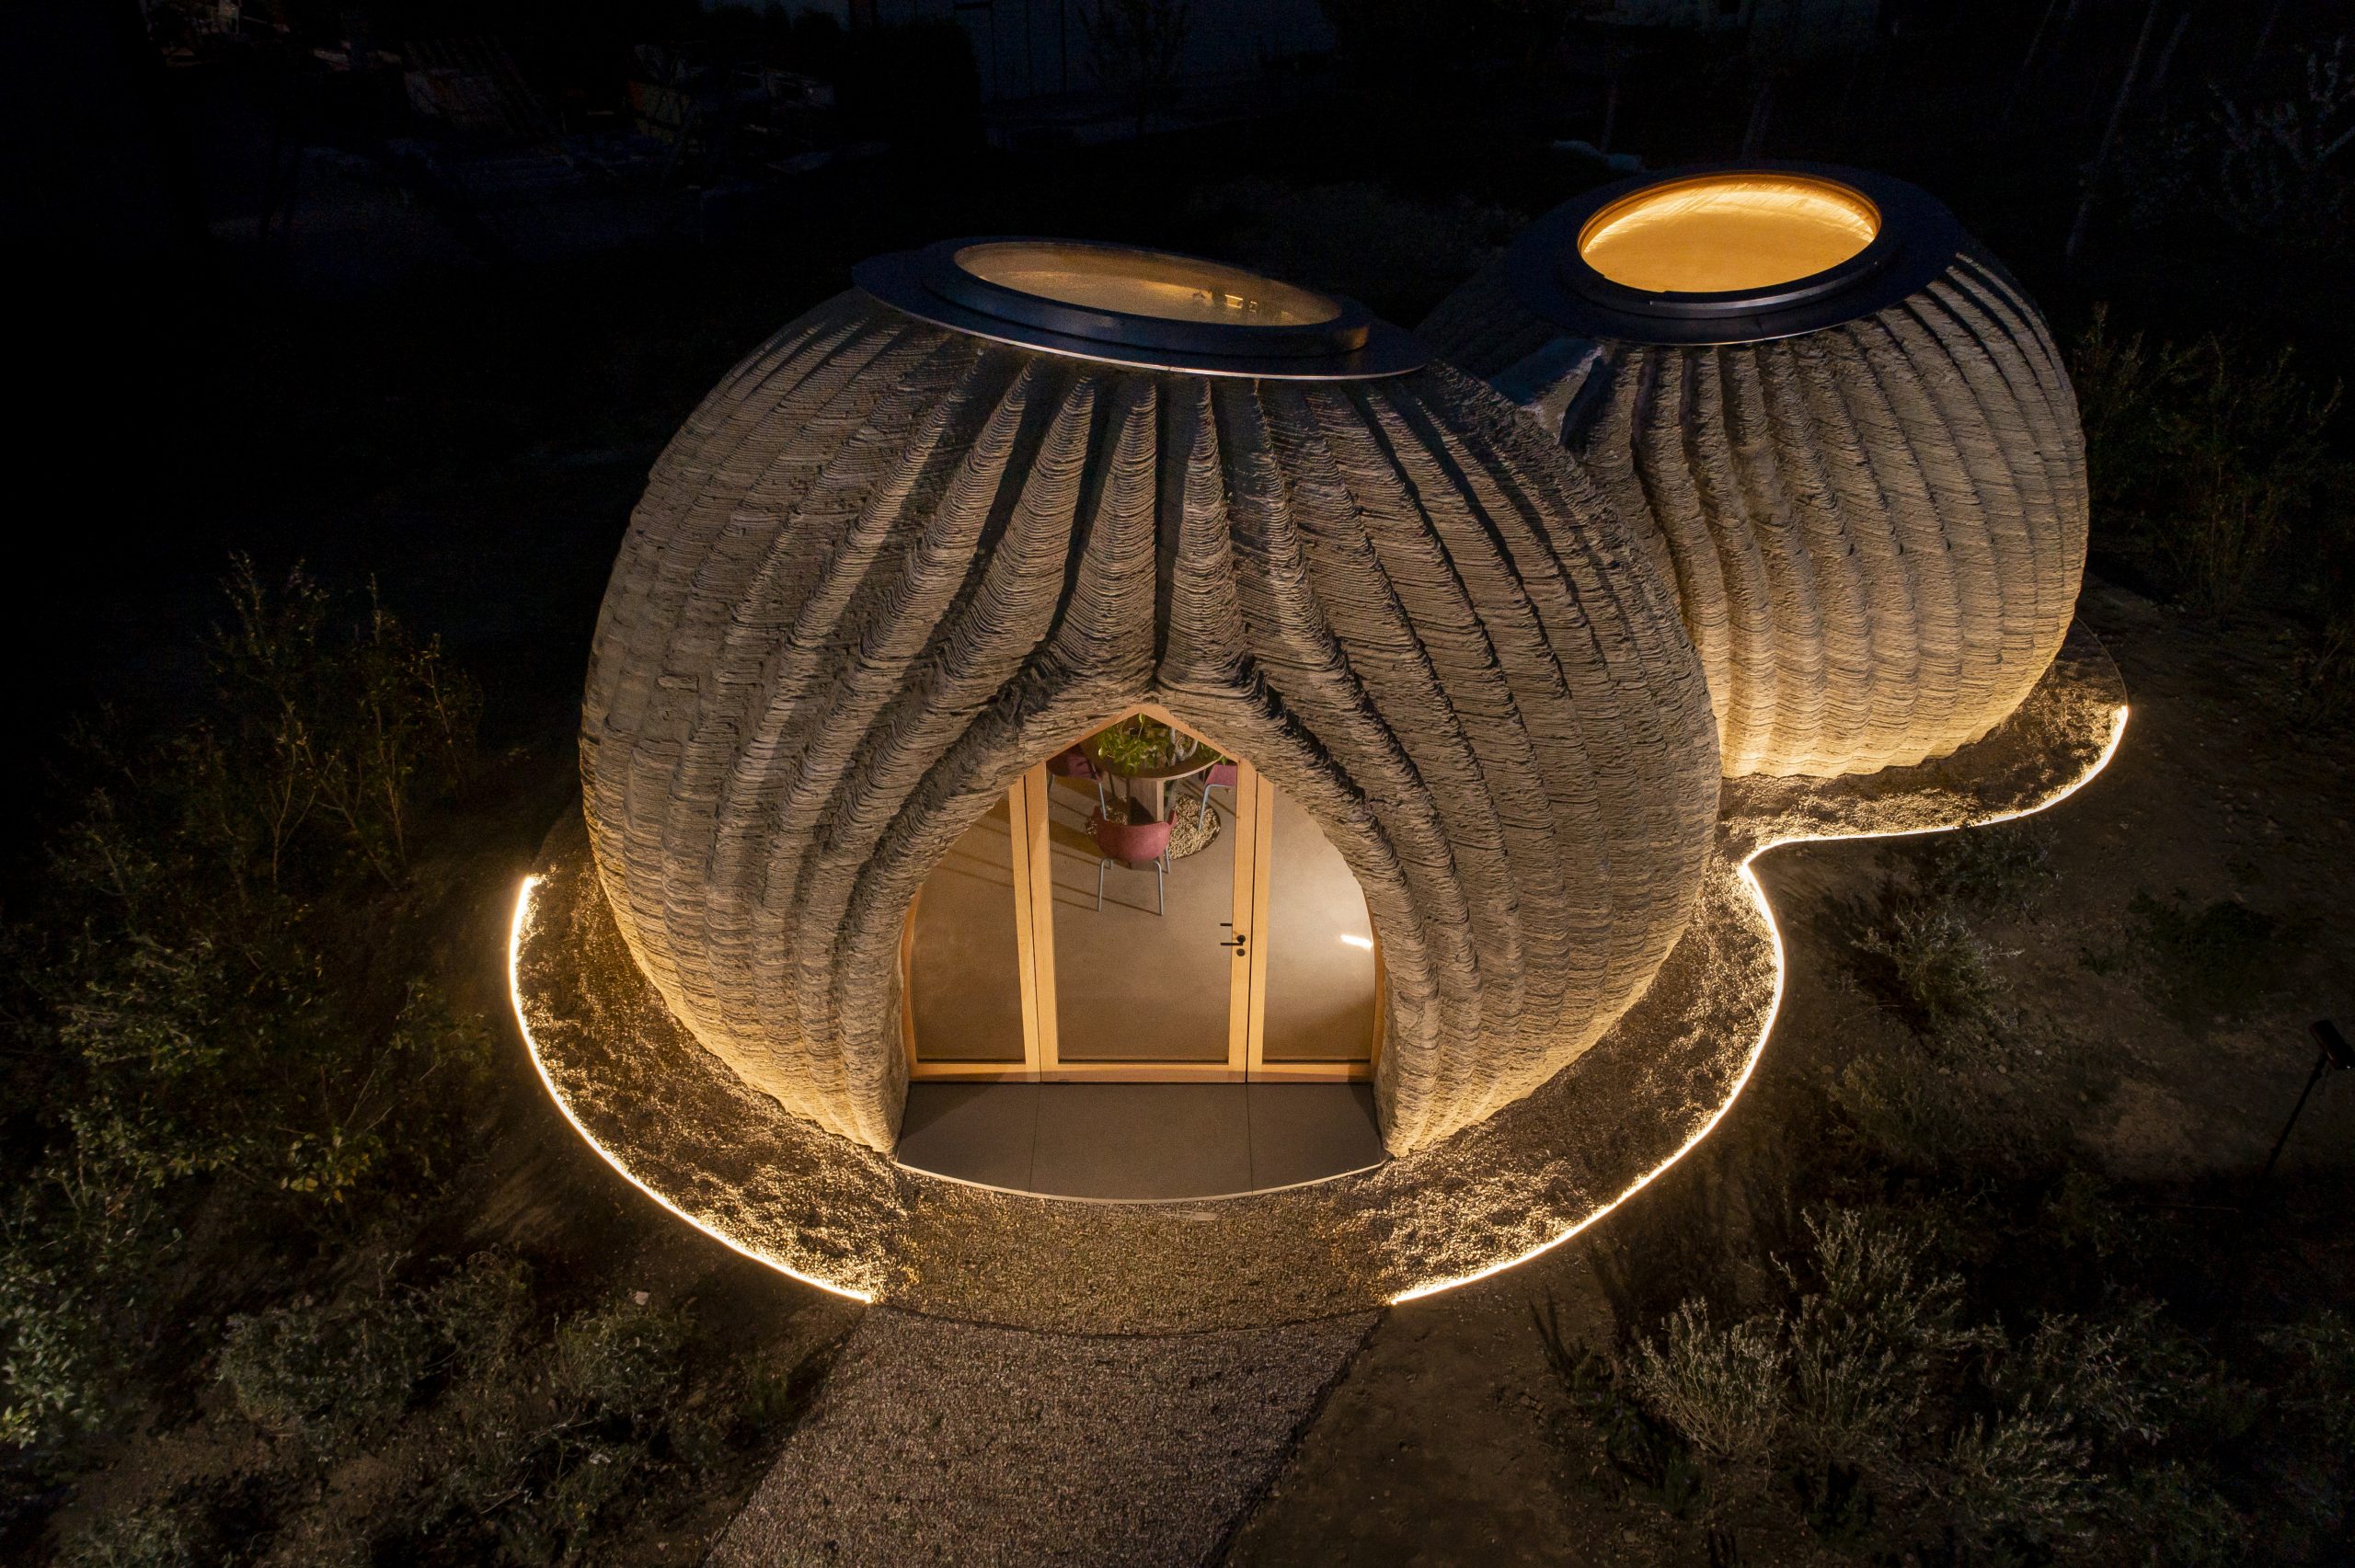 The TECLA 3D printed house was completed in 200 hours using just 6kw of energy. Photo via WASP.